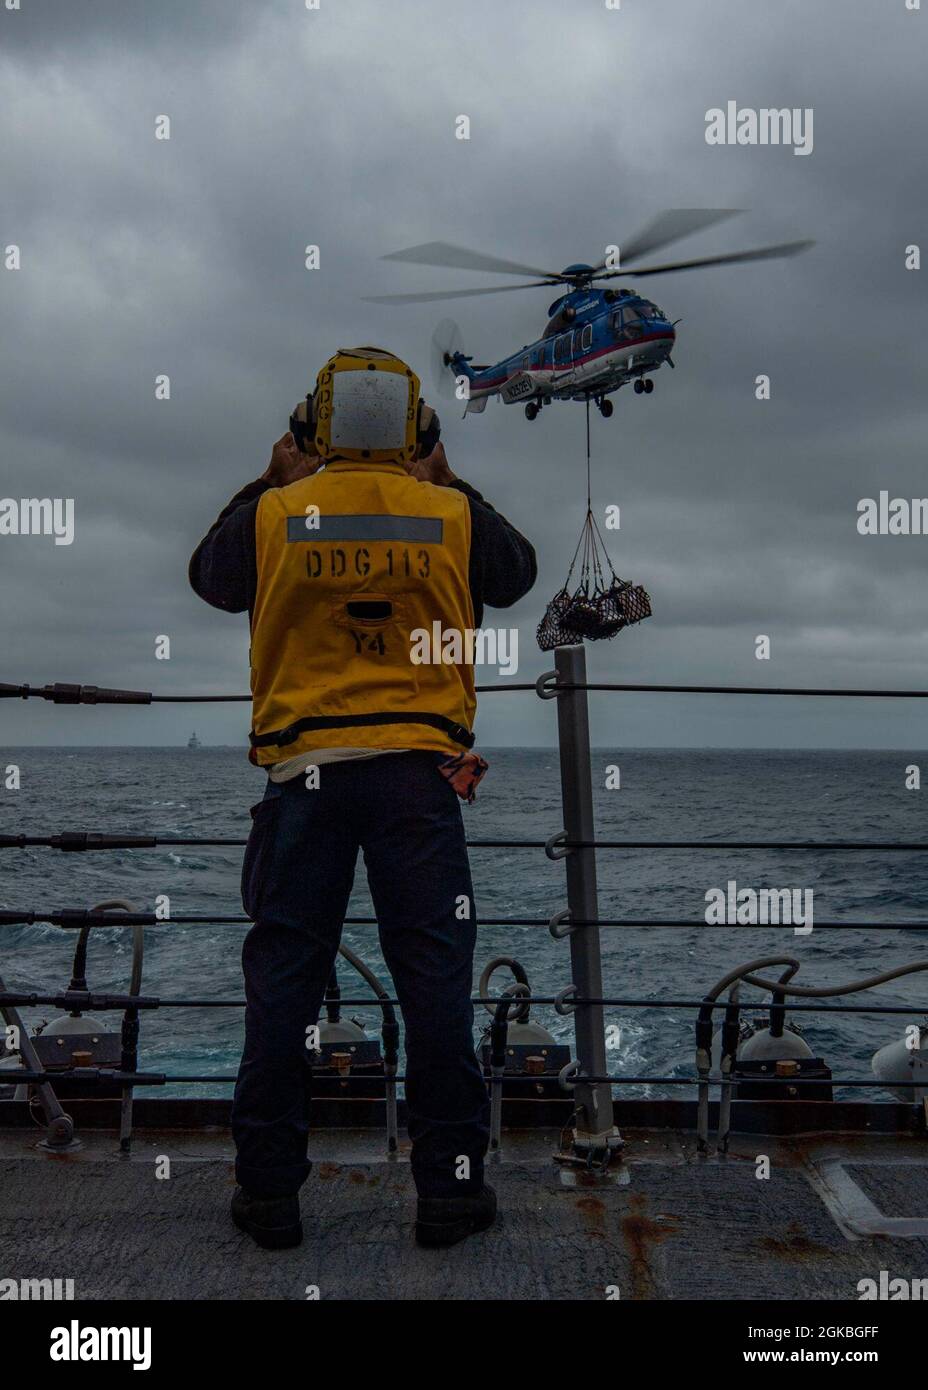 PACIFIC OCEAN (March 4, 2021) U.S. Navy Boatswain’s Mate Seaman Kyrese Robinson, from Sacramento, Calif., signals the pilot of an H225 Super Puma helicopter, assigned to the Military Sealift Command dry cargo and ammunition ship USNS Alan Shepard (T-AKE 3), from the aft missile deck of the Arleigh Burke-class guided-missile destroyer USS John Finn (DDG 113) during a vertical replenishment March 4, 2021. John Finn, part of the Theodore Roosevelt Carrier Strike Group, is on a scheduled deployment to the U.S. 7th Fleet area of operations. As the U.S. Navy’s largest forward-deployed fleet, 7th Fle Stock Photo